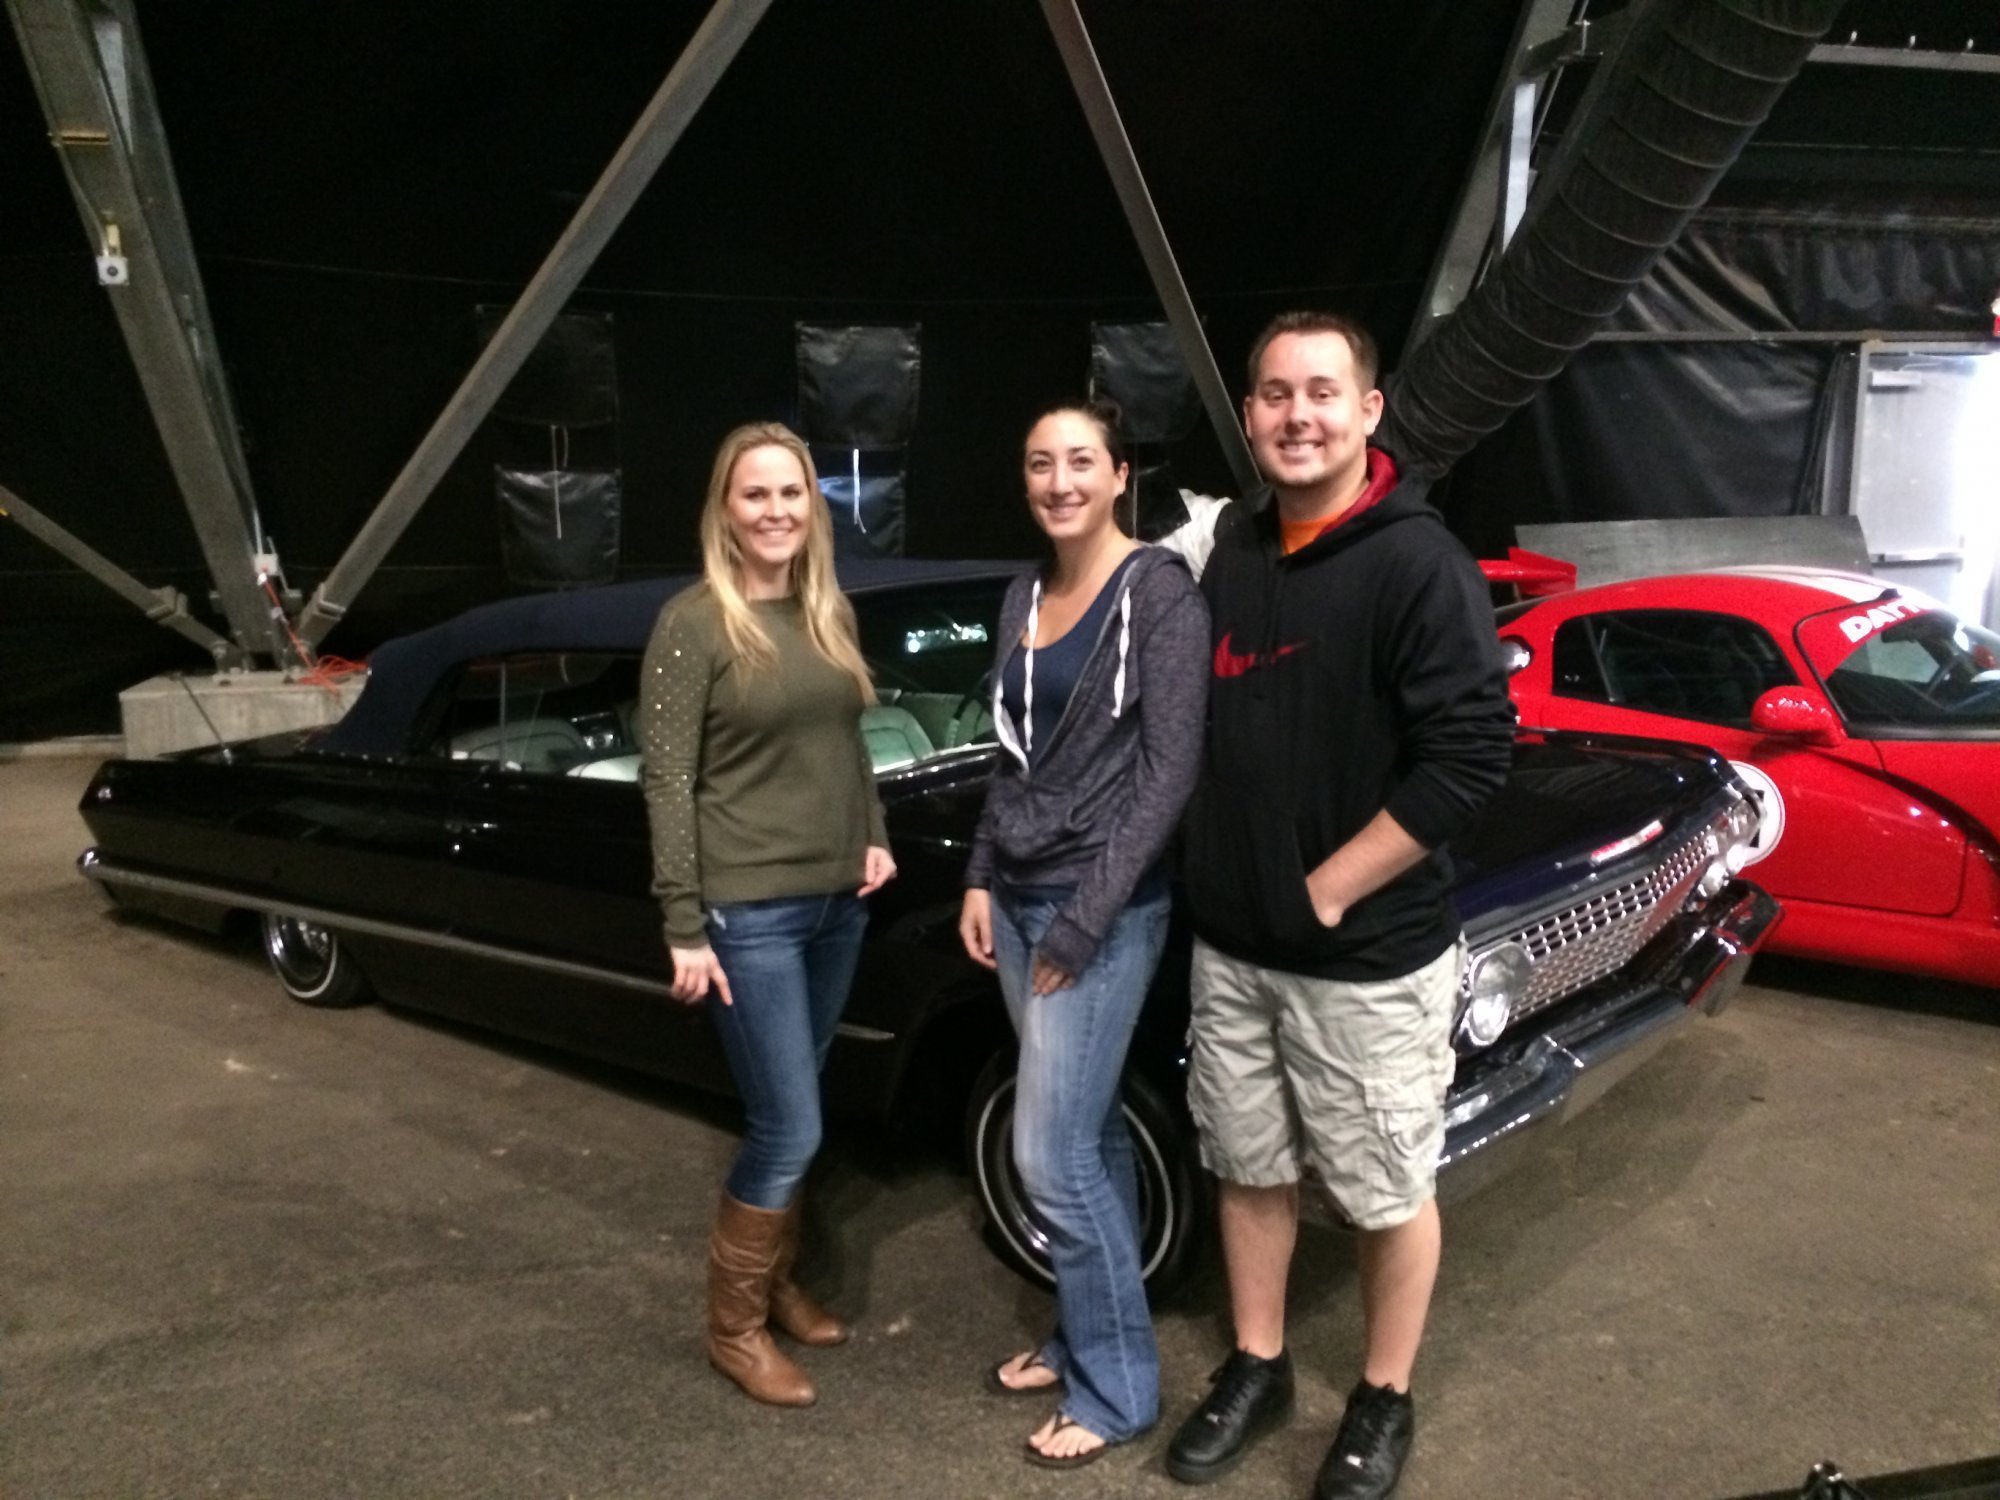 2014 Barrett-Jackson - Collector Car Auction - 1 Ticket is Good for 2 people